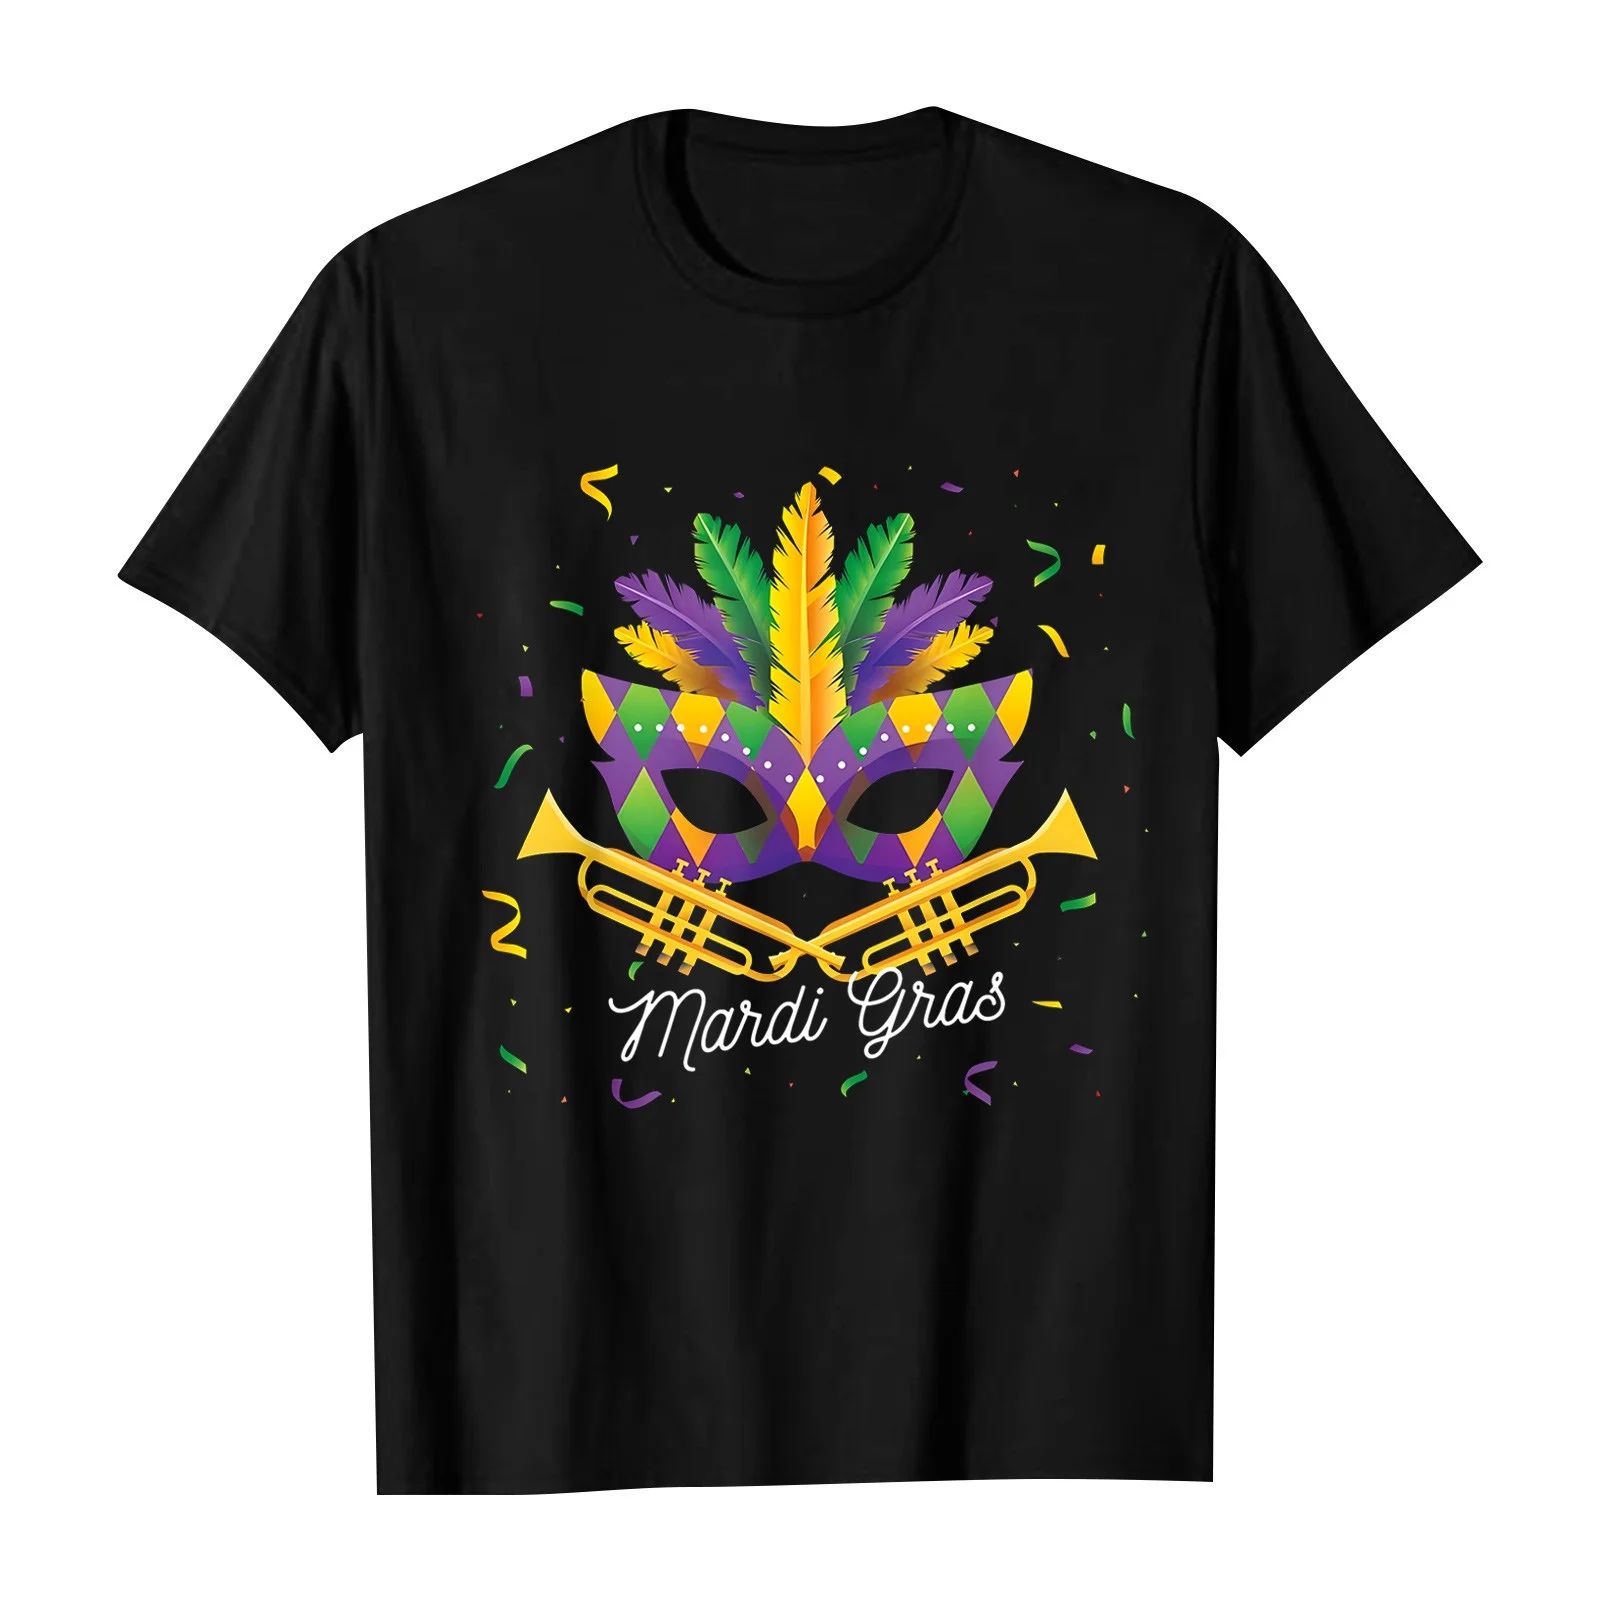 It's Mardi Gras y'all Dressy Shirts for Women Short Sleeve Crew Neck Carnival Themed Tunic Tops P... | Walmart (US)